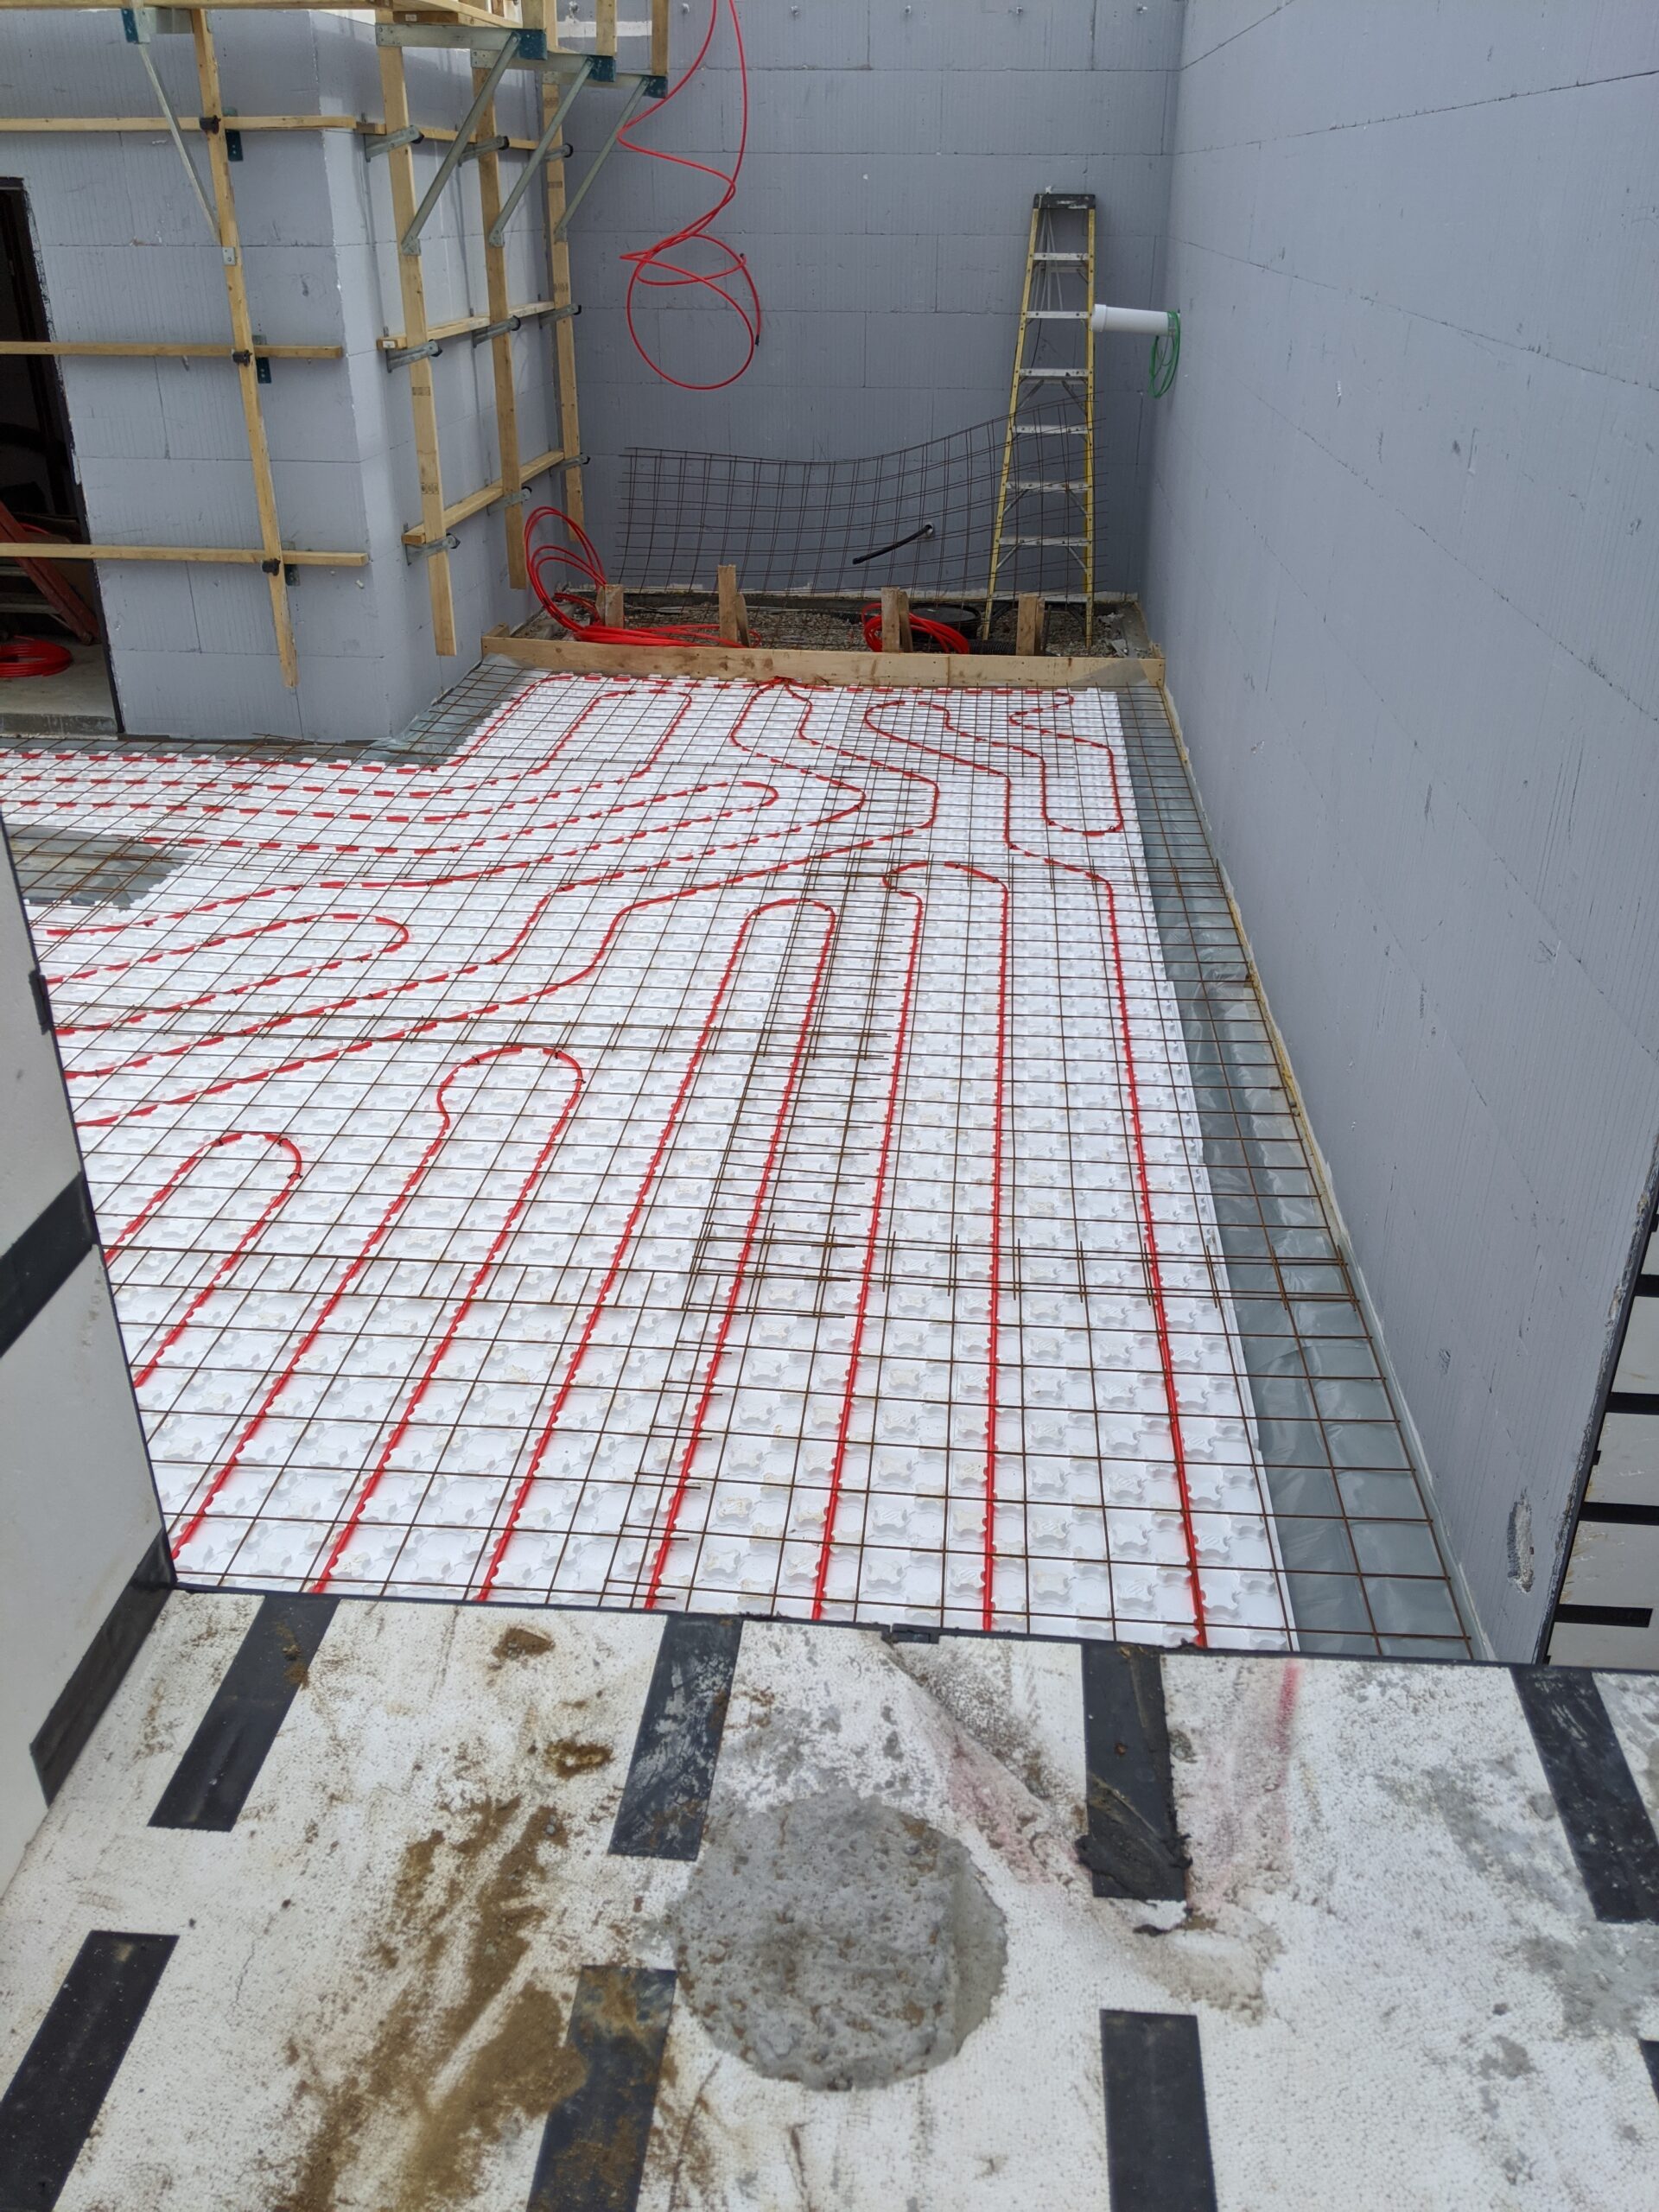 Radiant Floor heating as seen from a window view of an ICF Basement Foundation